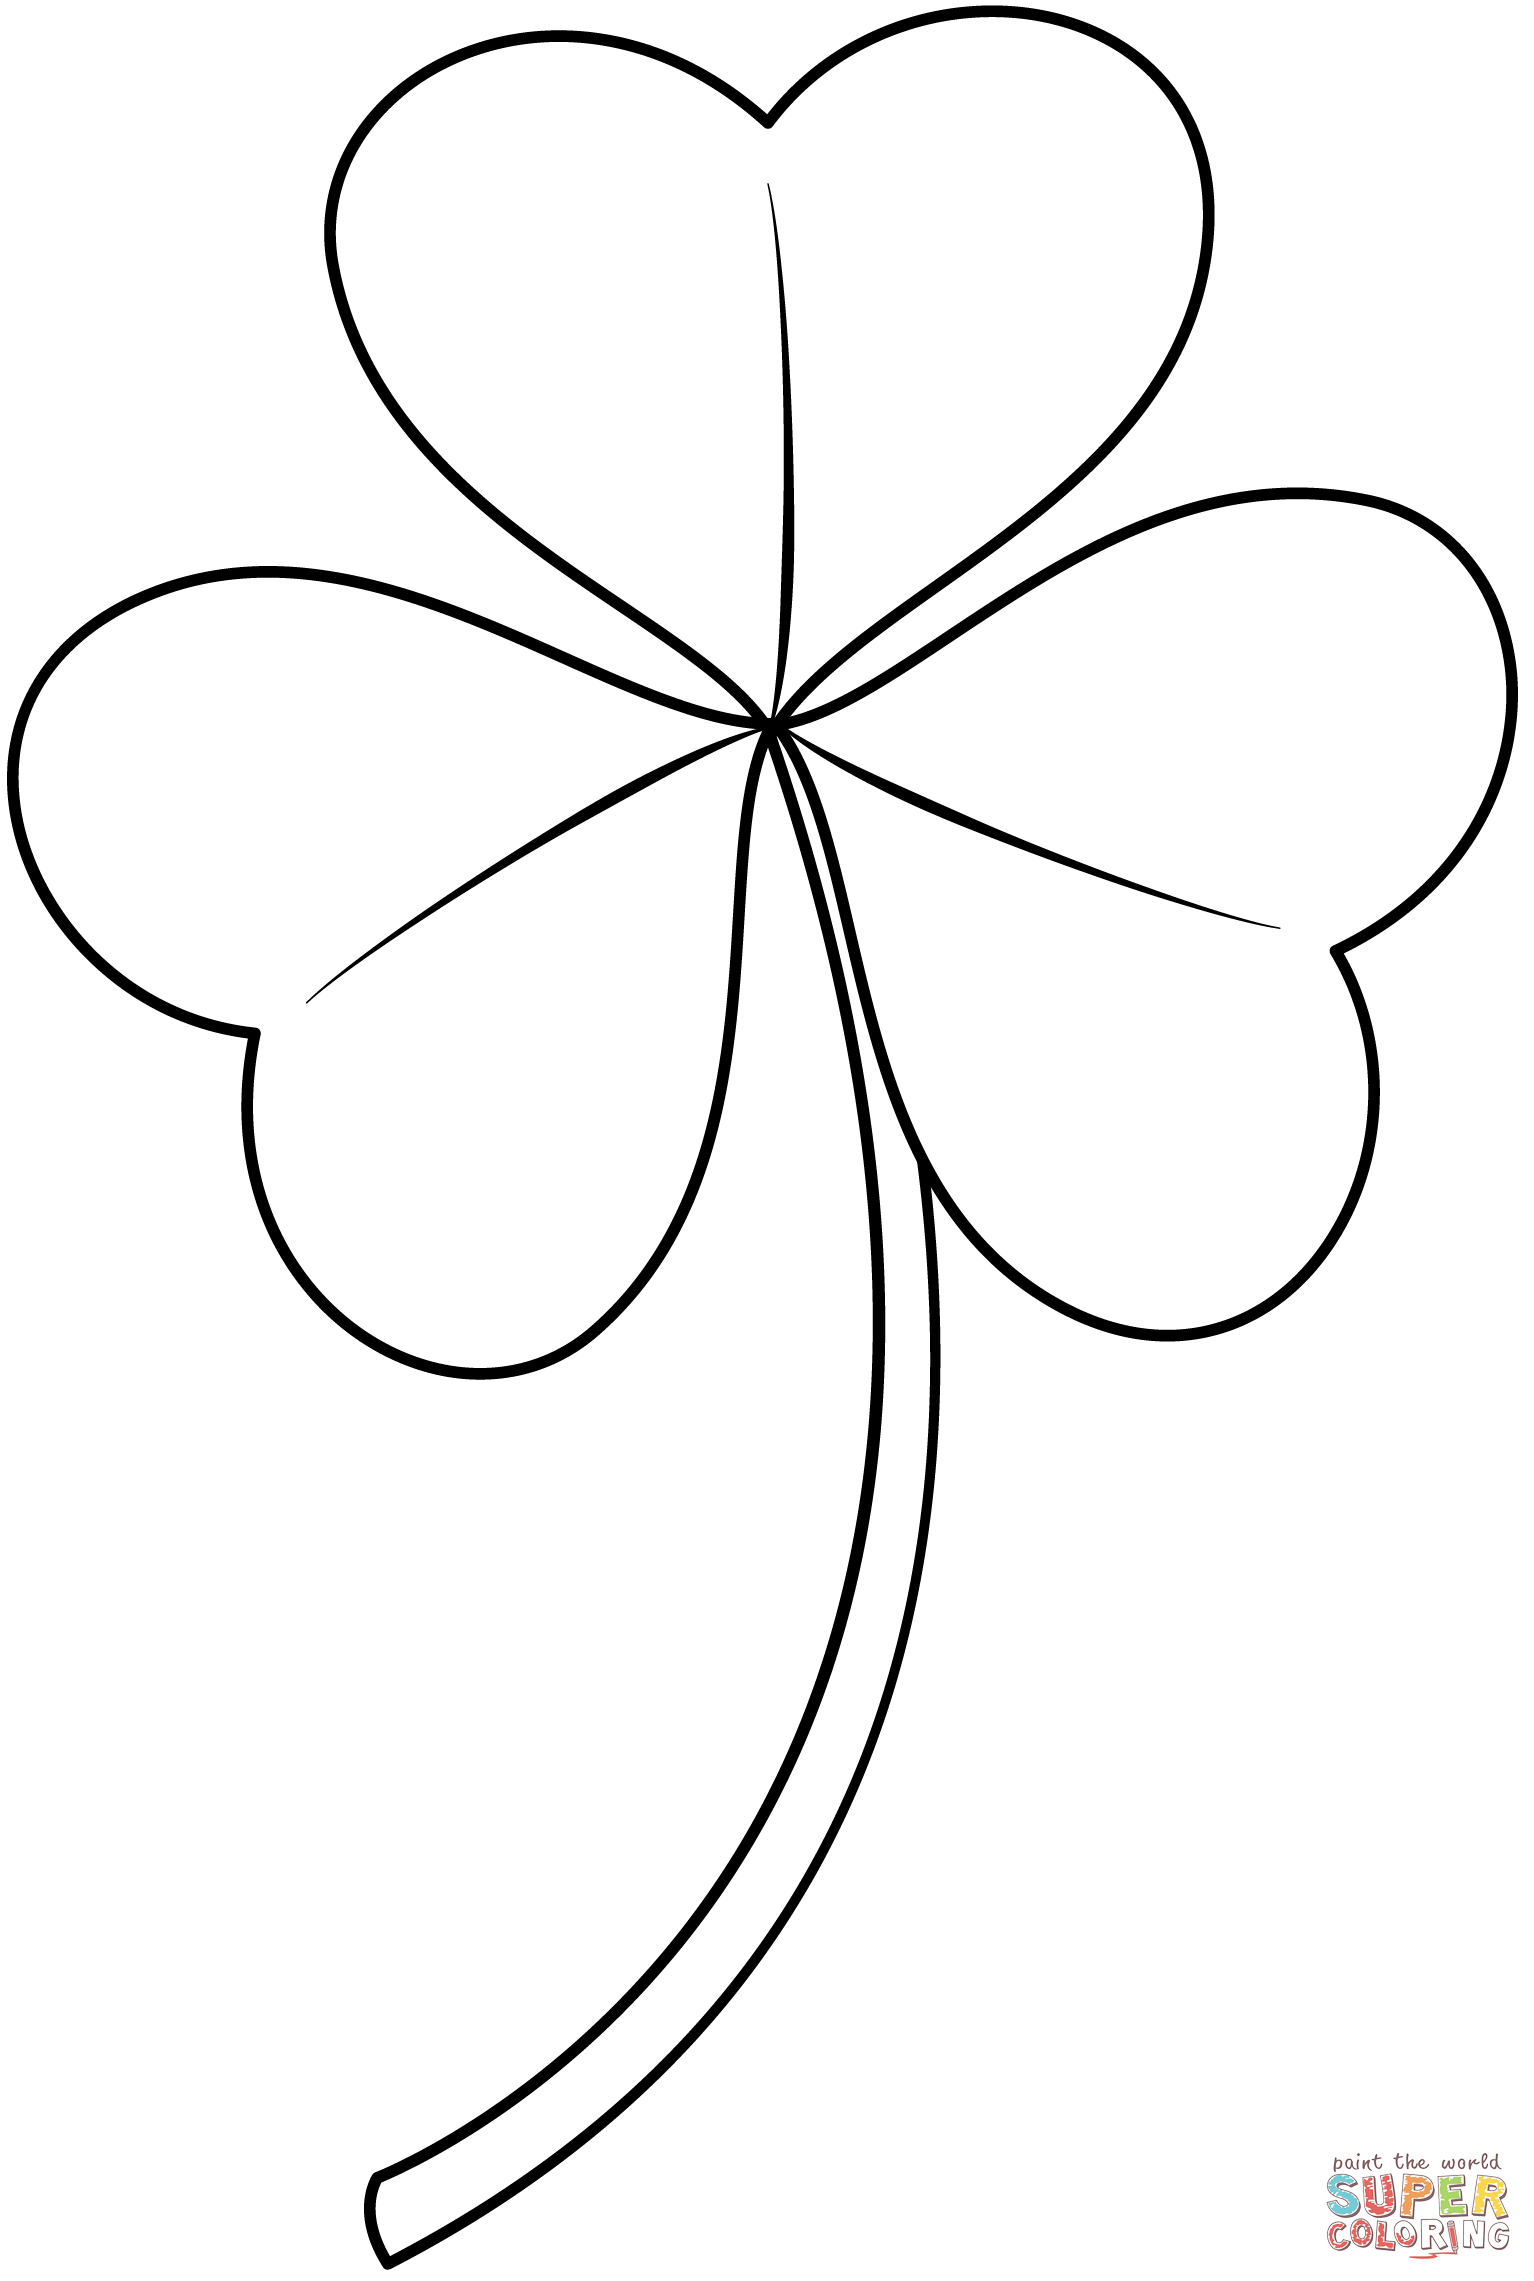 Three leaf shamrock coloring page free printable coloring pages